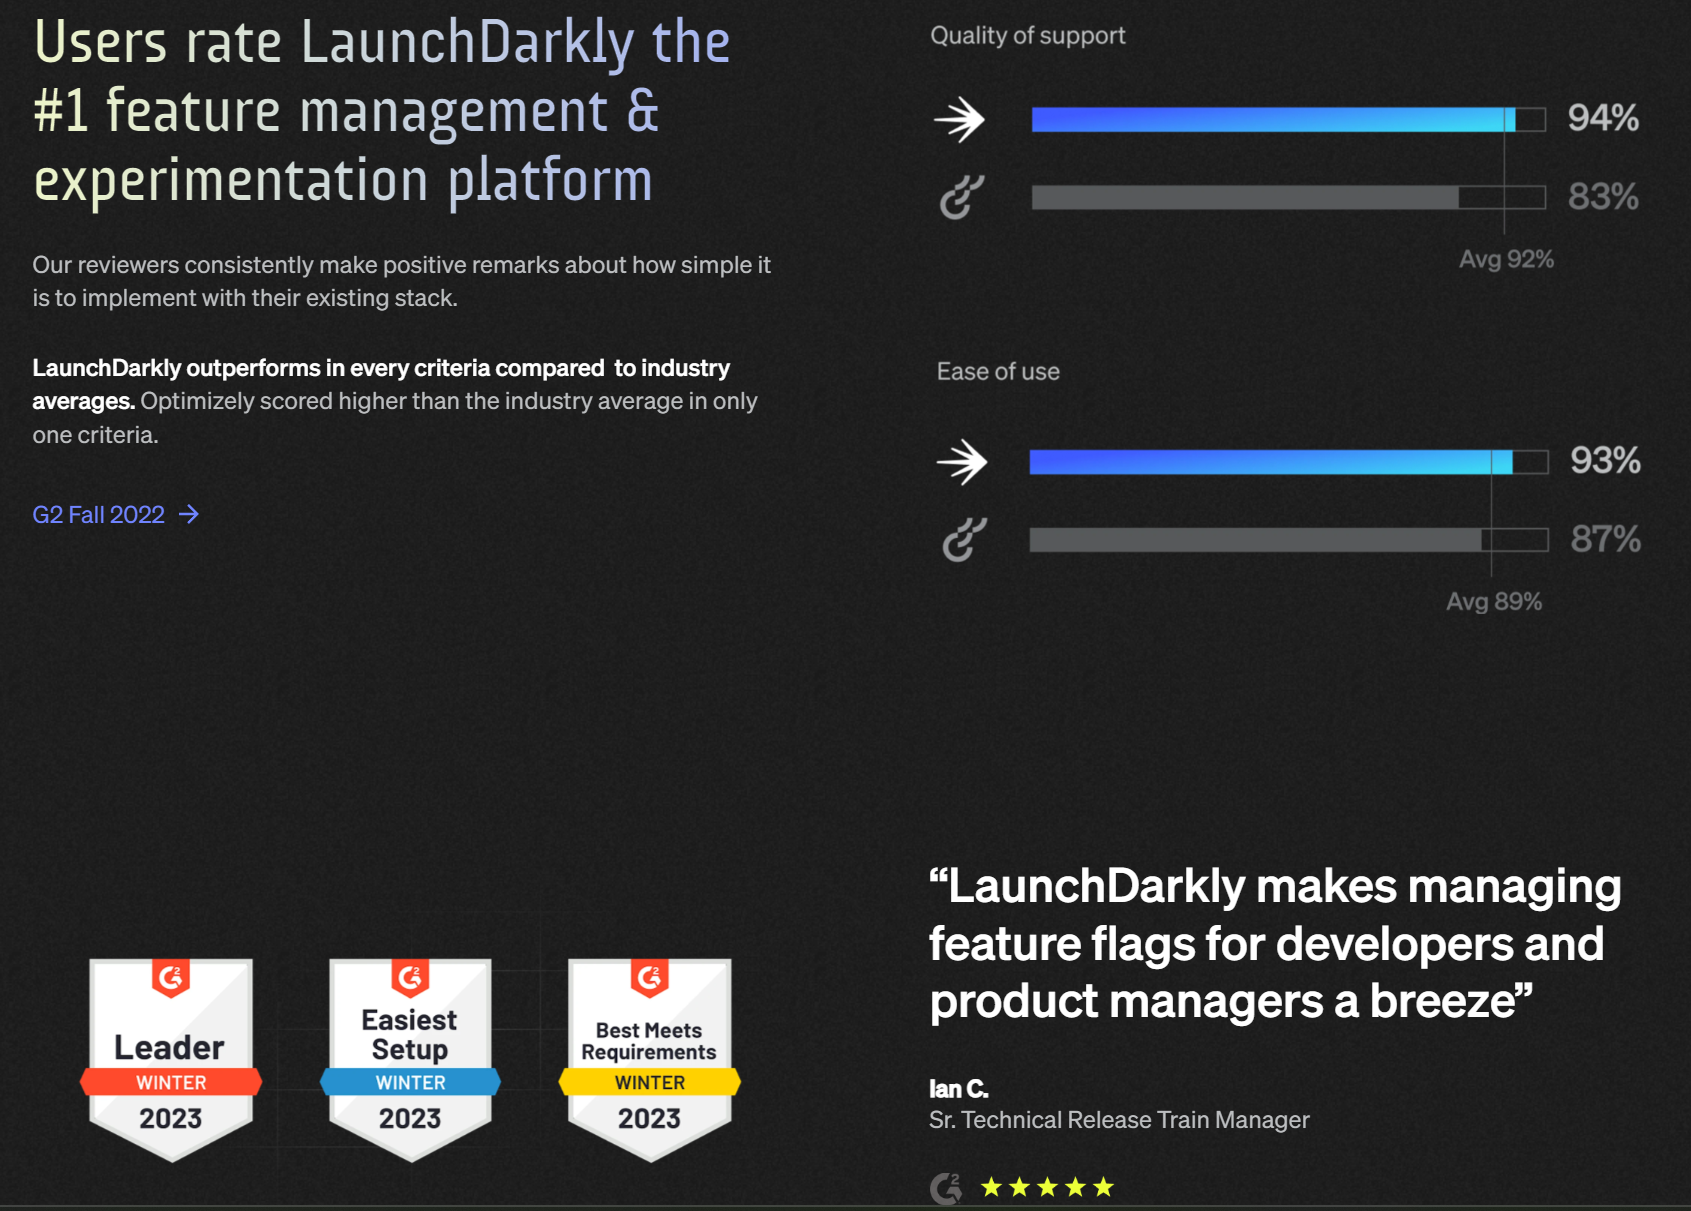 LaunchDarkly comparison page links to G2 2022 report and lists recent awards.